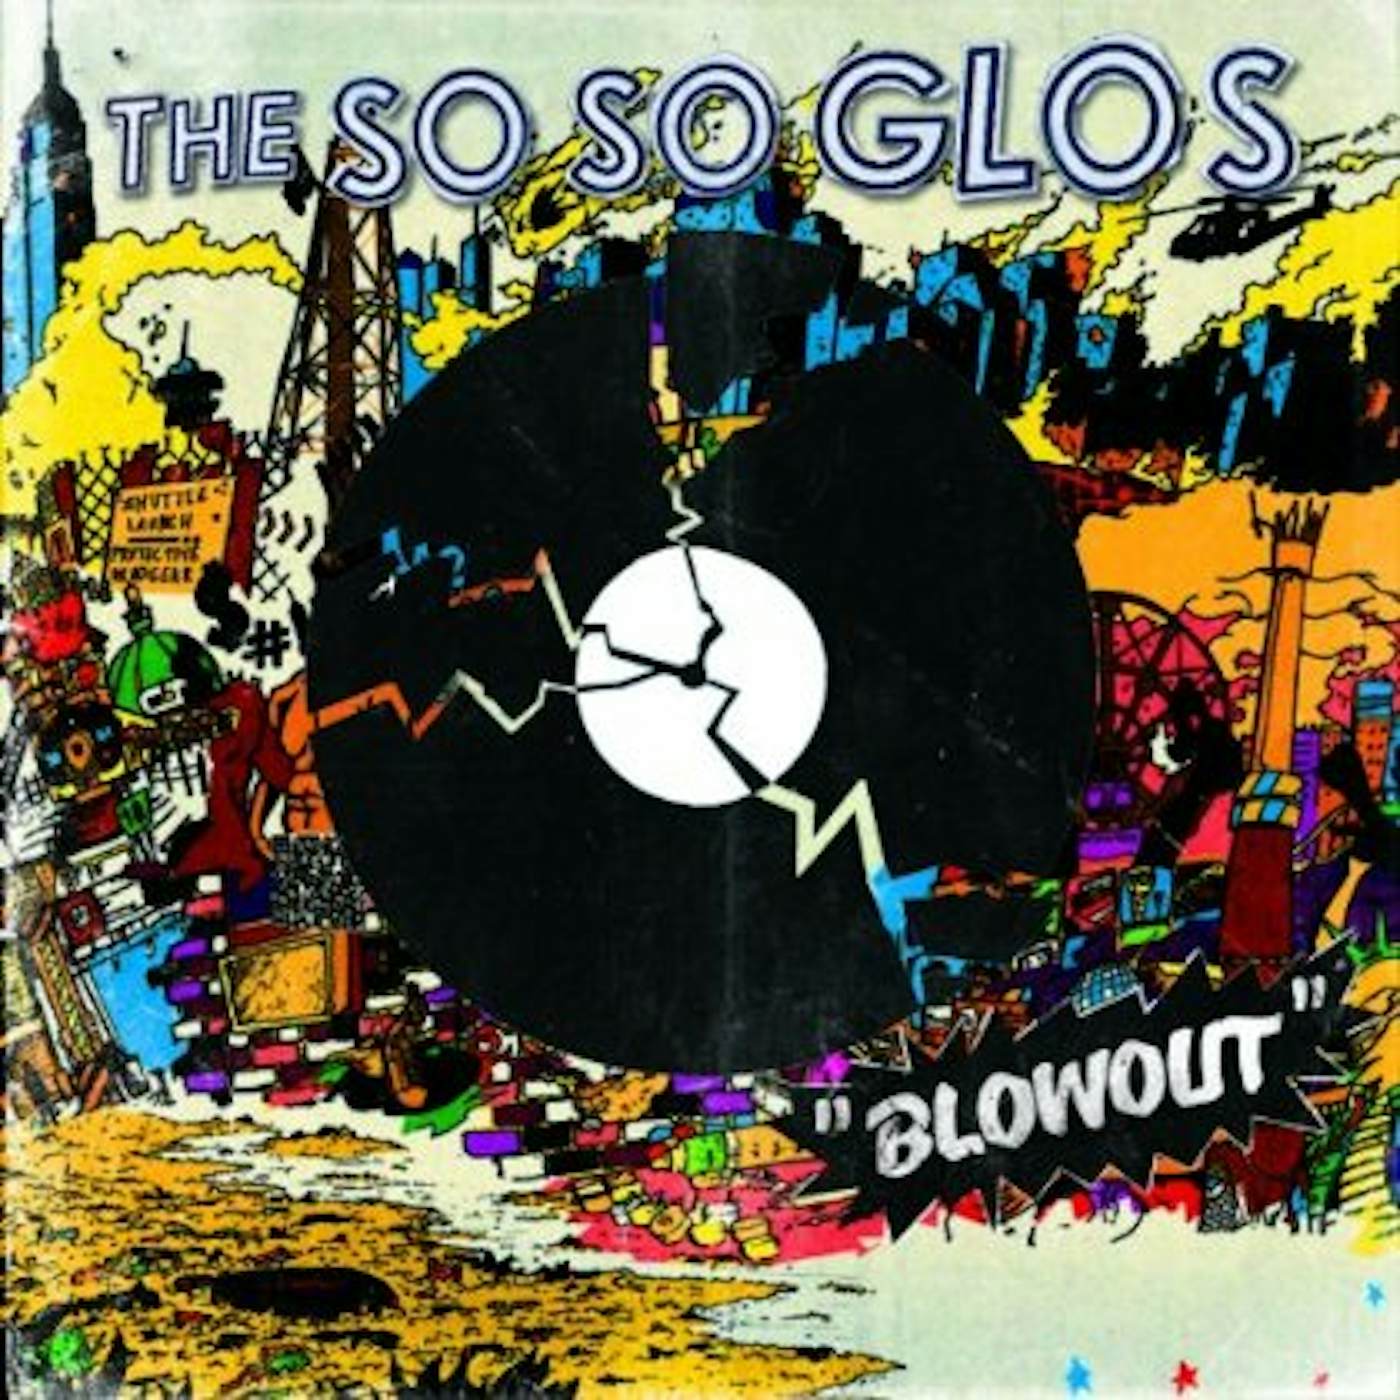 The So So Glos BLOWOUT CD